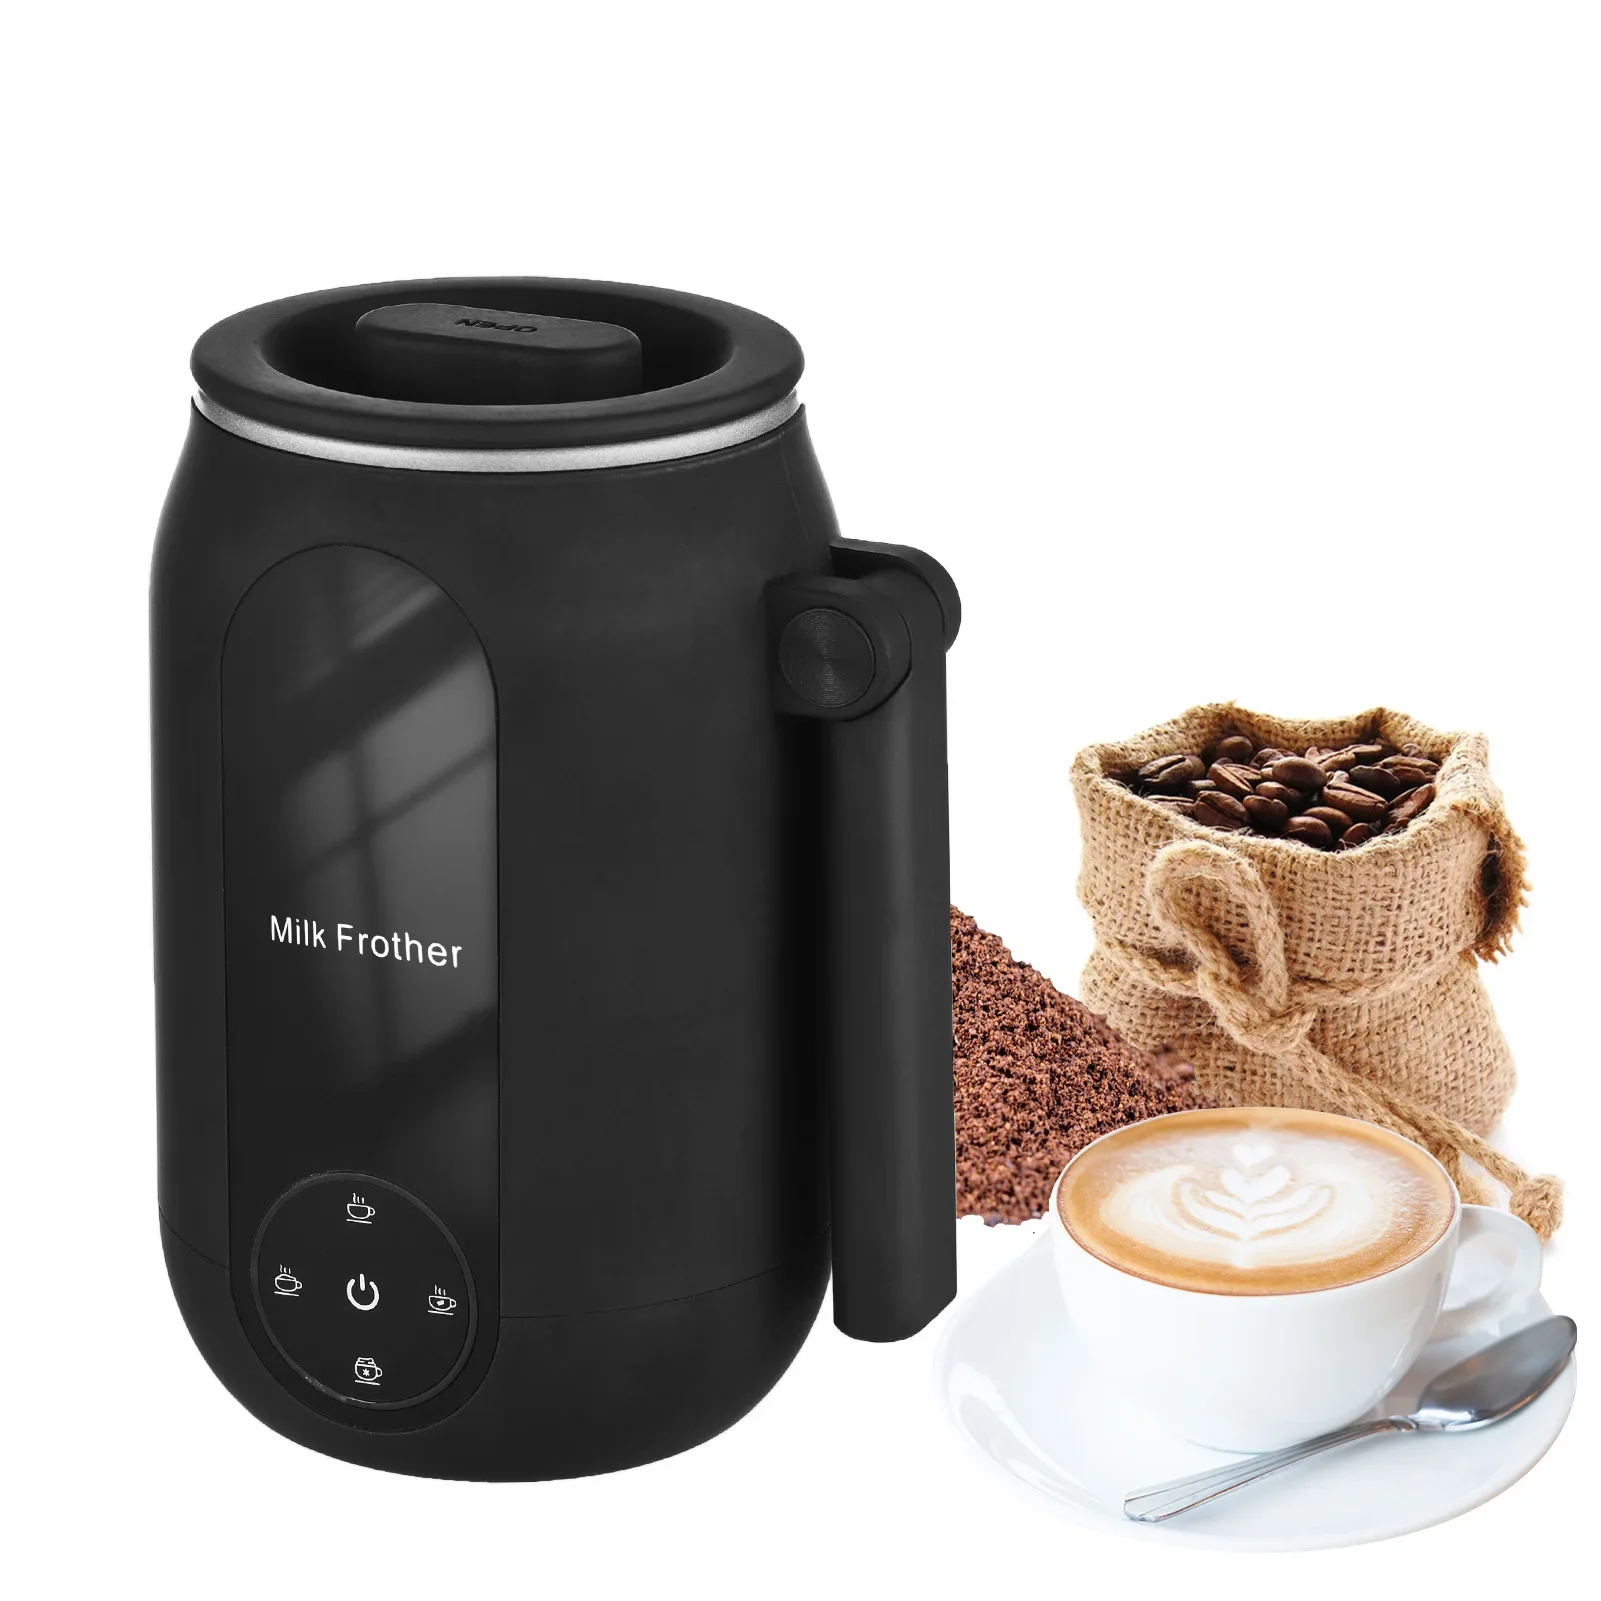 

500W Electric Milk Frother Cooker for Frothing 4-in-1 Milk Steamer with Rotatable Handle Foam Maker for Coffee/Latte/Cappuccino